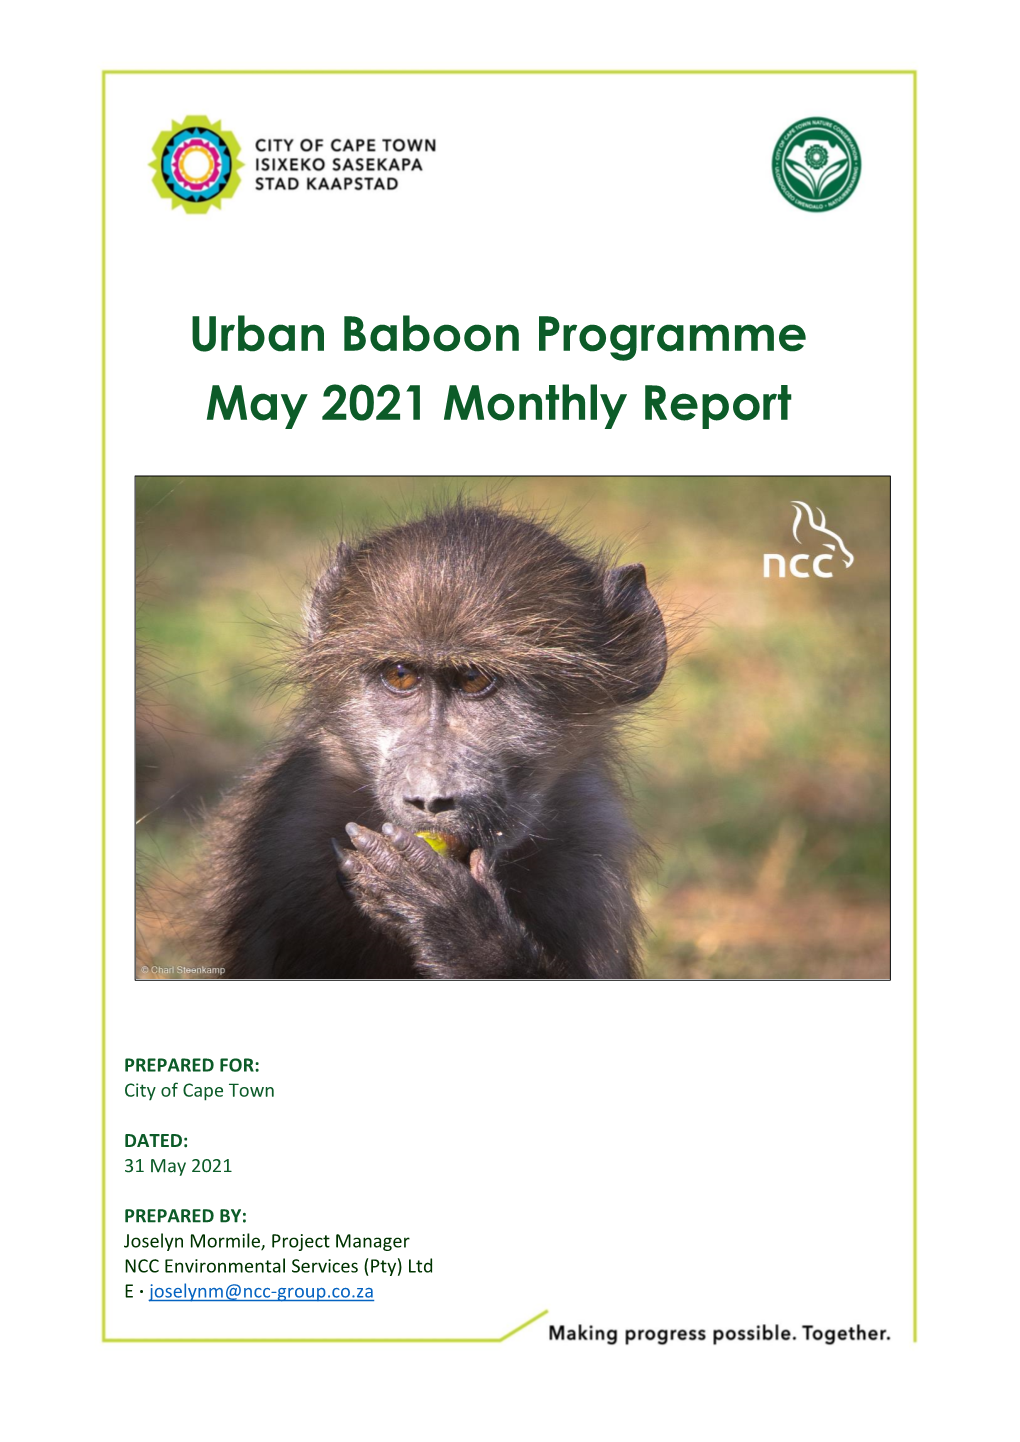 Urban Baboon Programme May 2021 Monthly Report